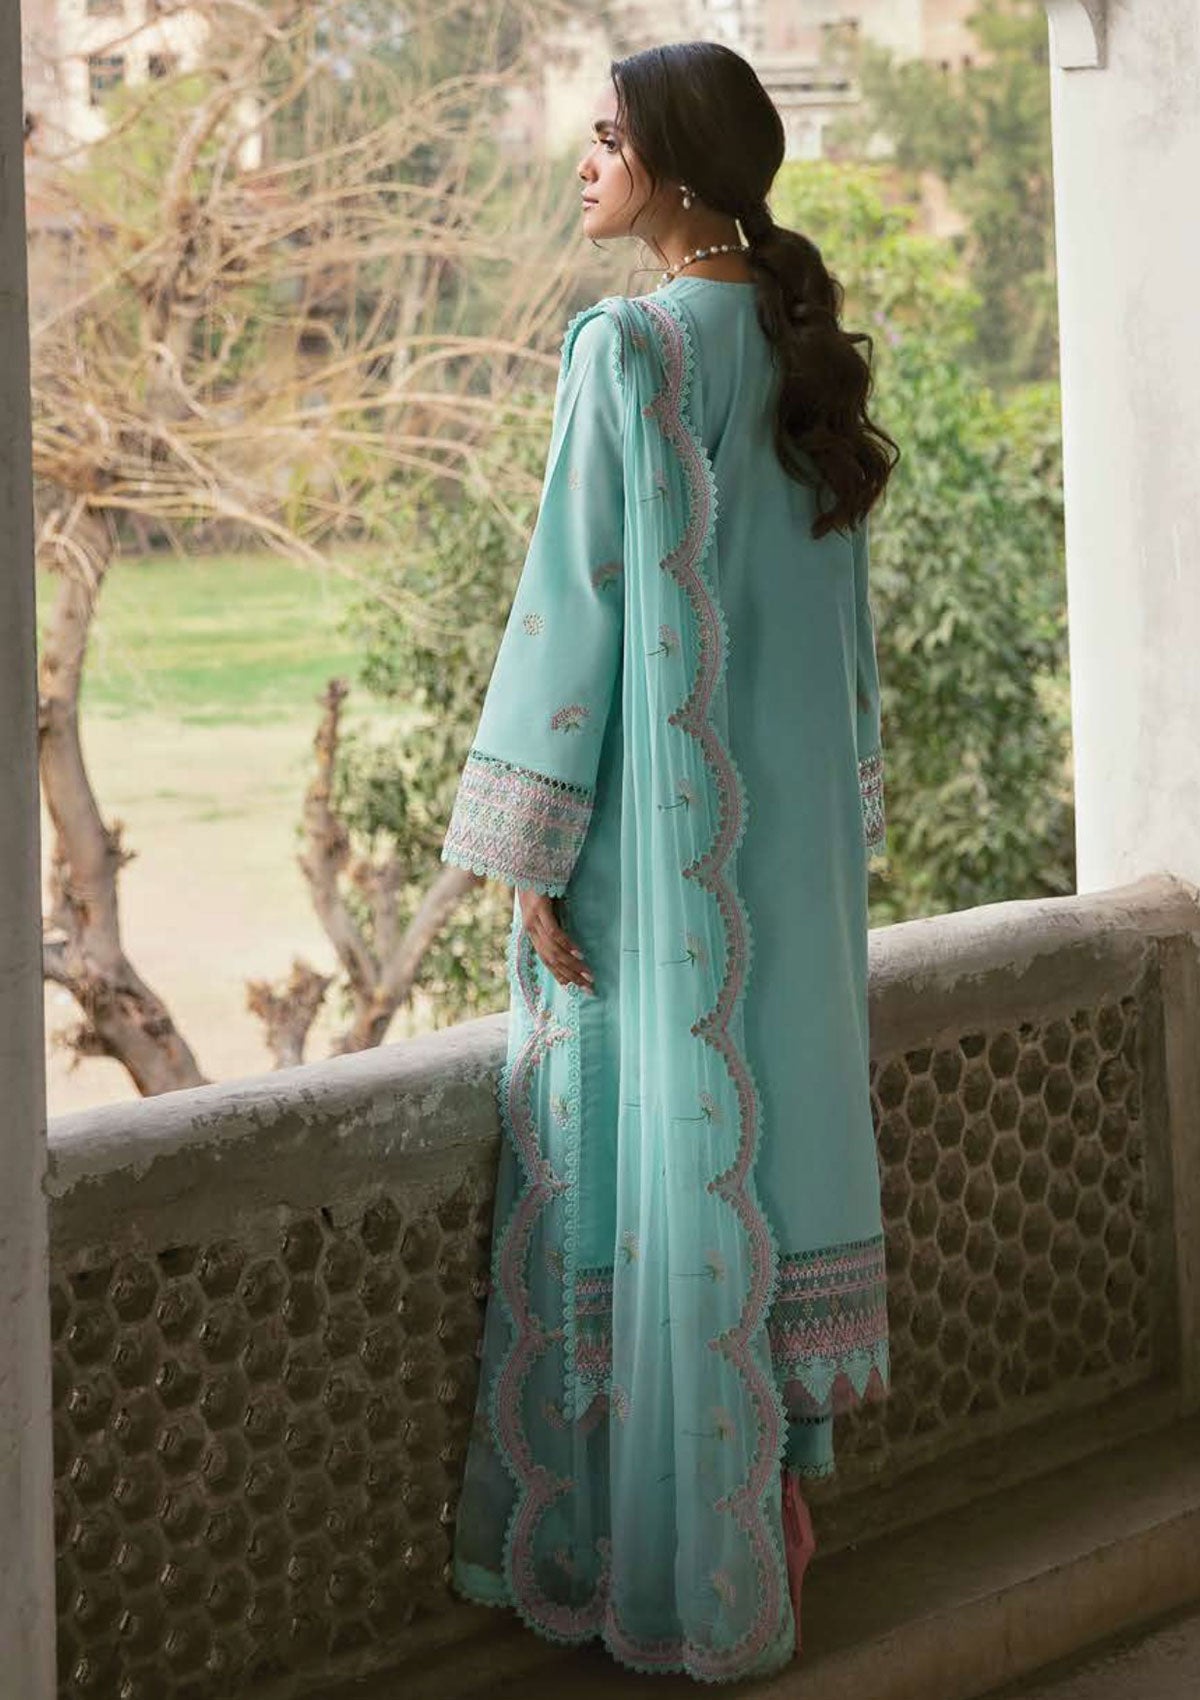 Lawn Collection - Afrozeh - Lamhay - AL#04 (Crystal Cyan) available at Saleem Fabrics Traditions